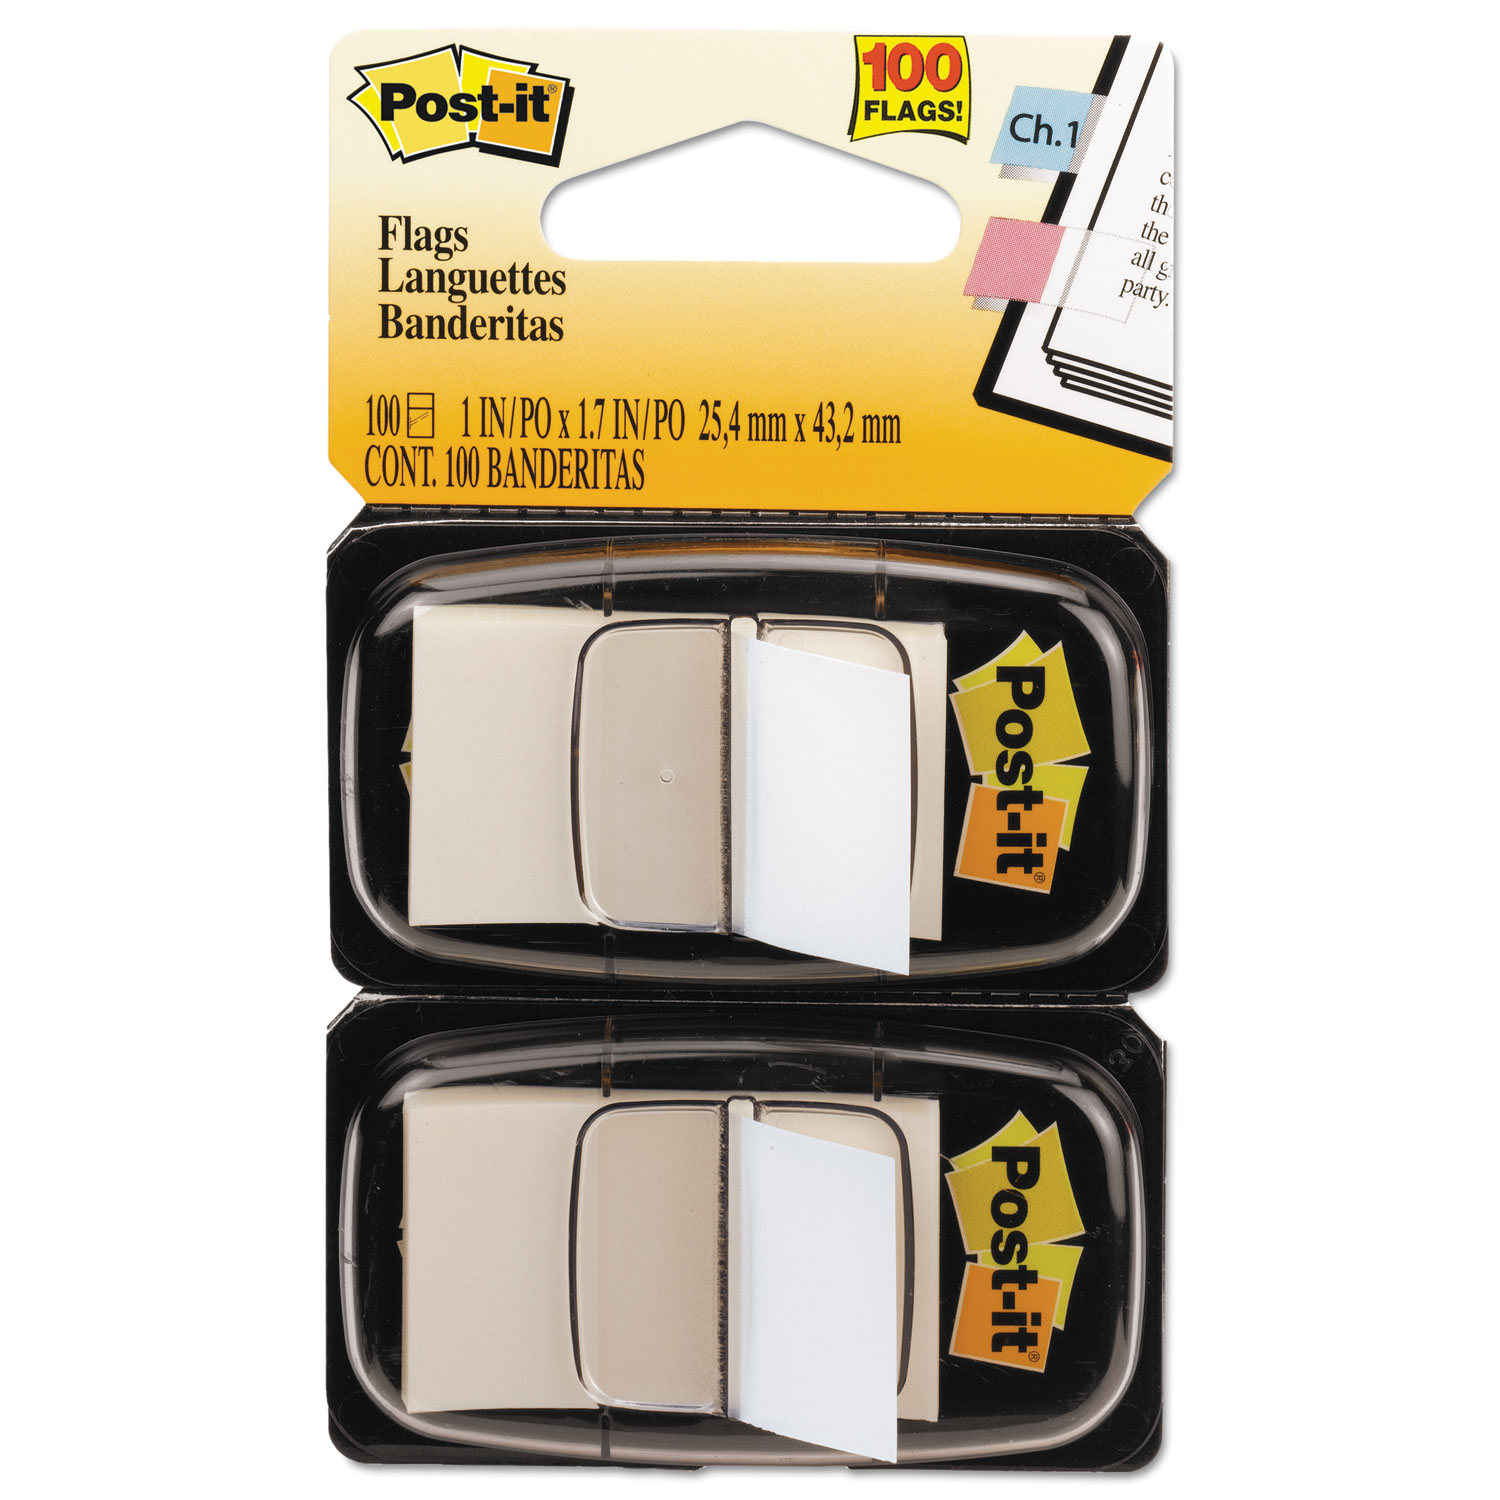  Post-it Flags 680-WE2 Standard Page Flags in Dispenser, White, 100 Flags/Dispenser (MMM680WE2) 